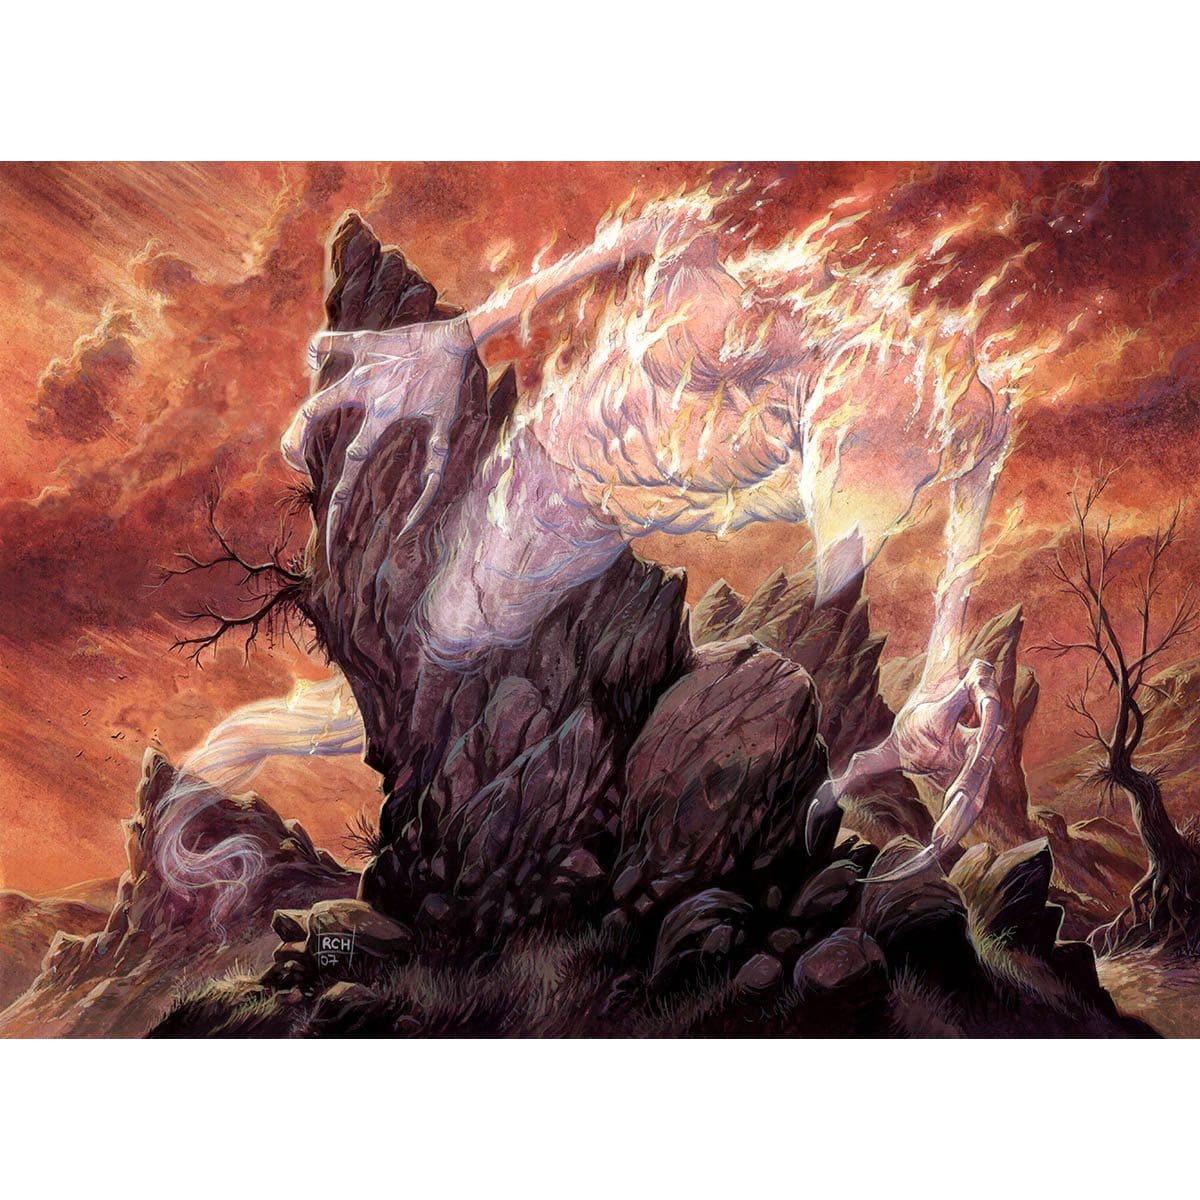 Balefire Liege Print - Print - Original Magic Art - Accessories for Magic the Gathering and other card games